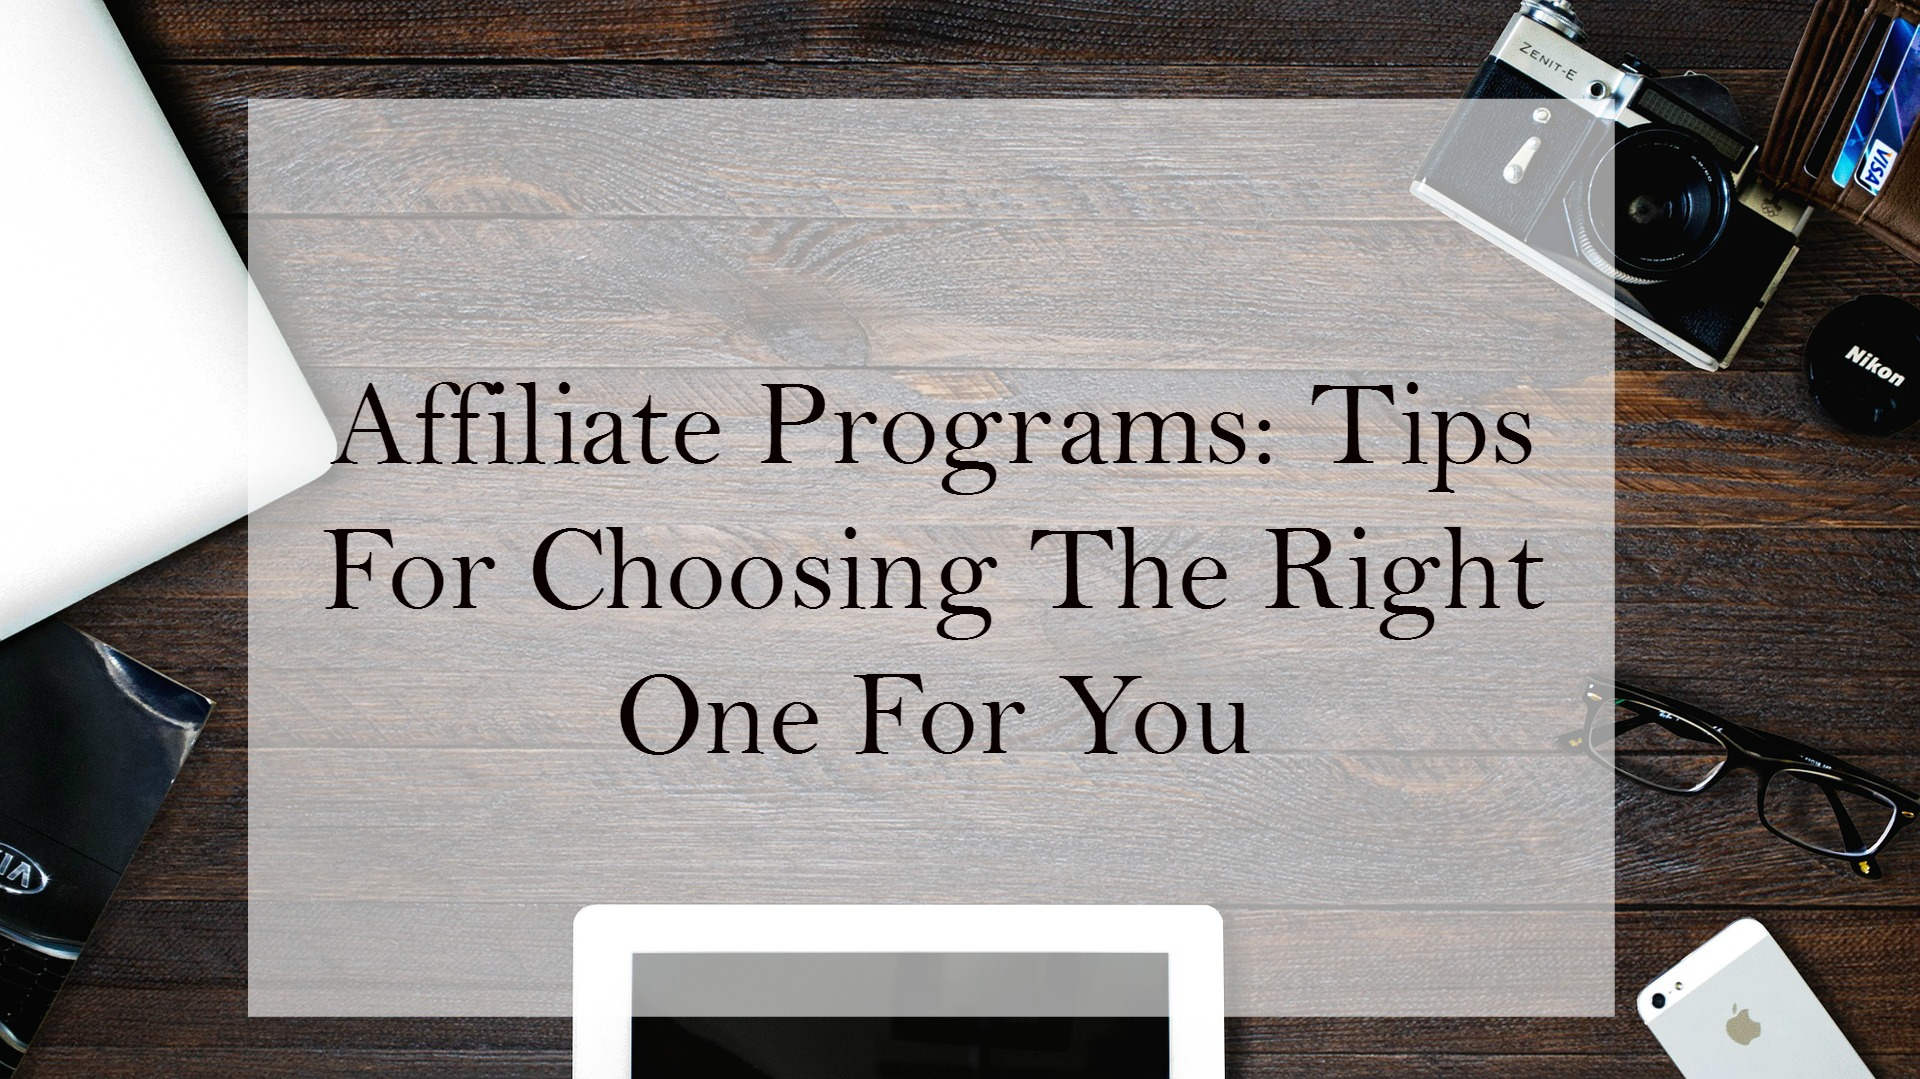 Affiliate Programs: Tips For Choosing The Right One For You